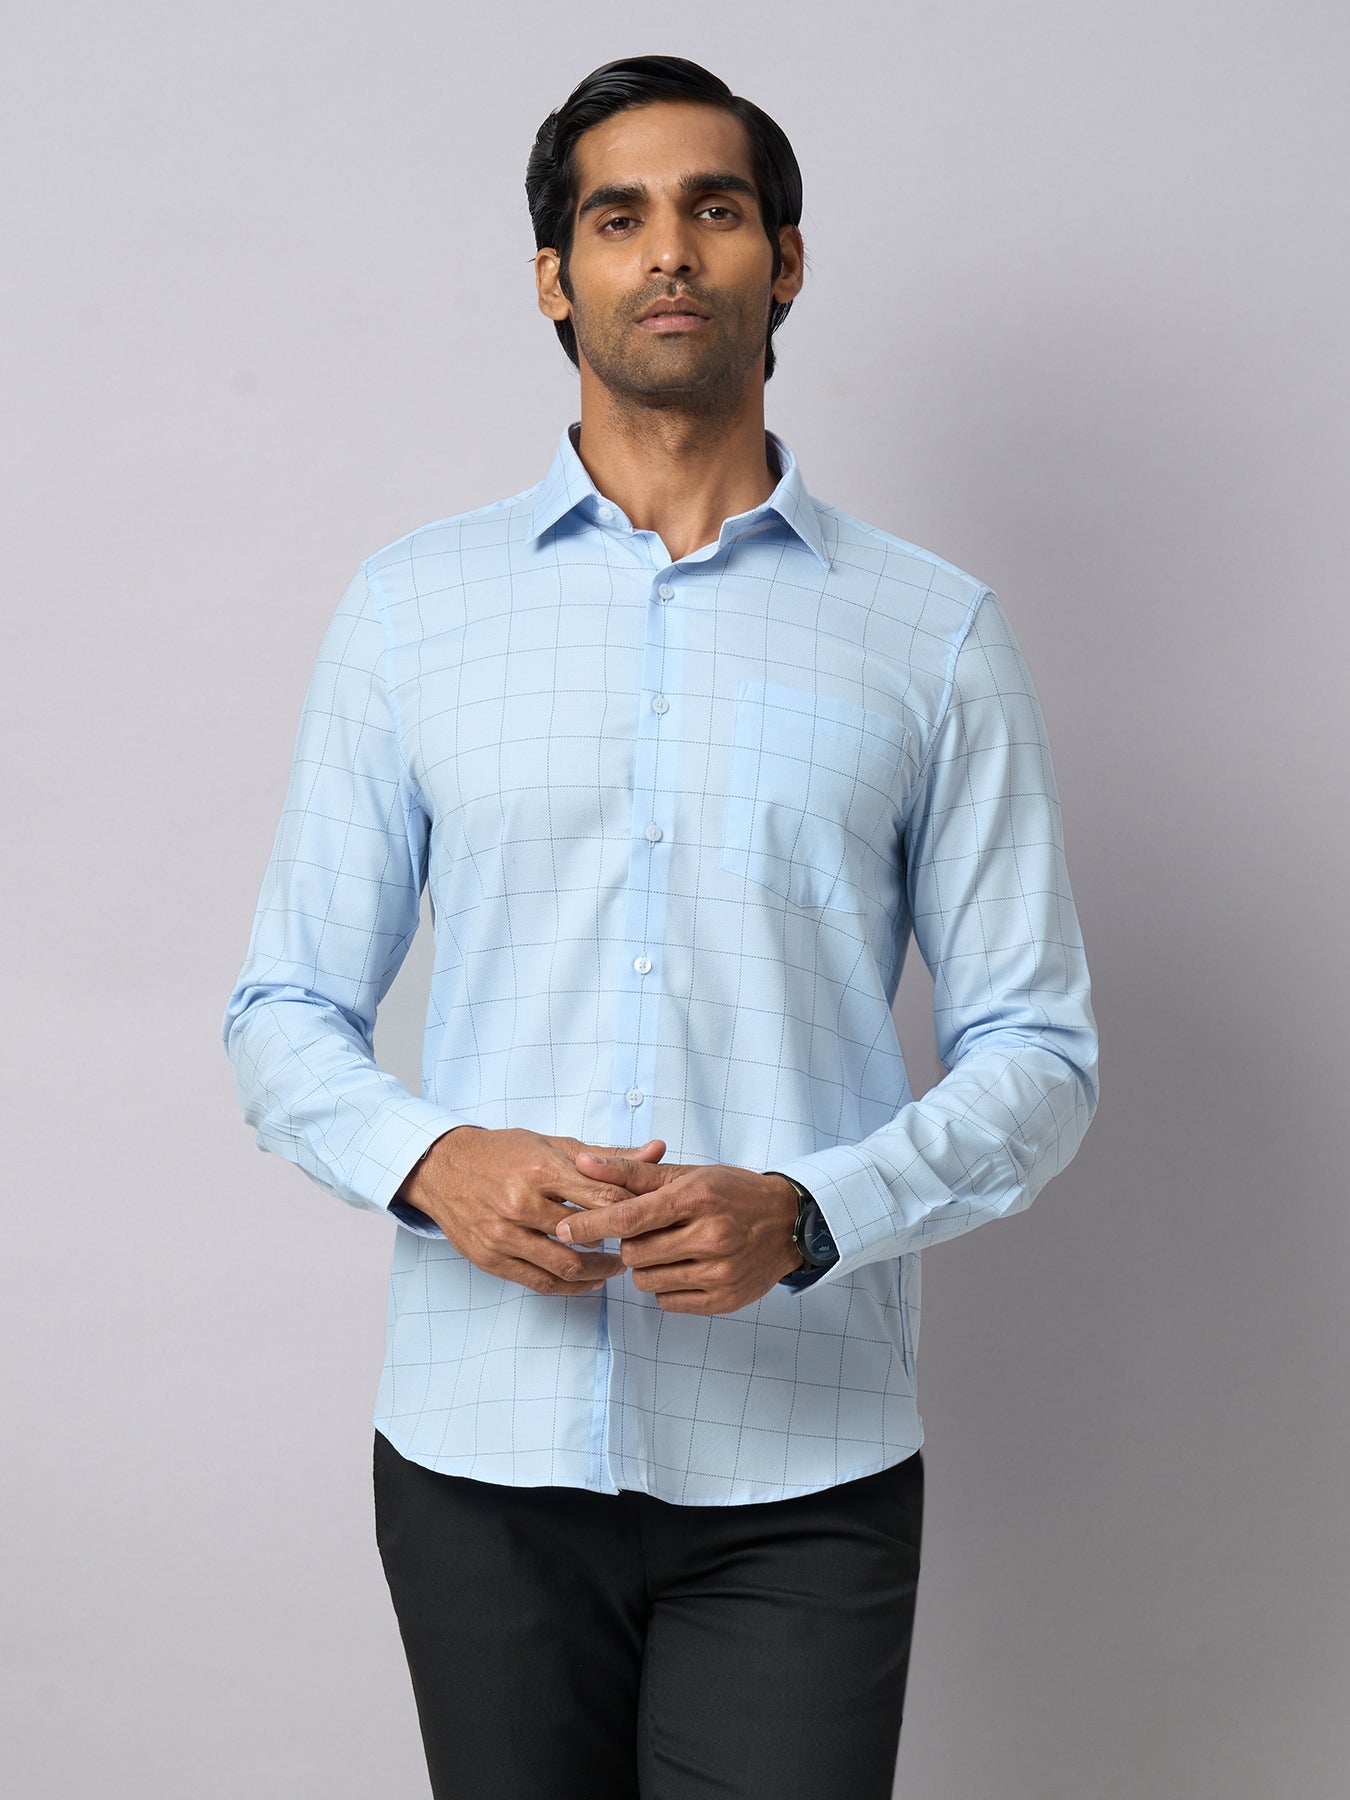 100% Cotton Sky Blue Checkered Slim Fit Full Sleeve Formal Shirt